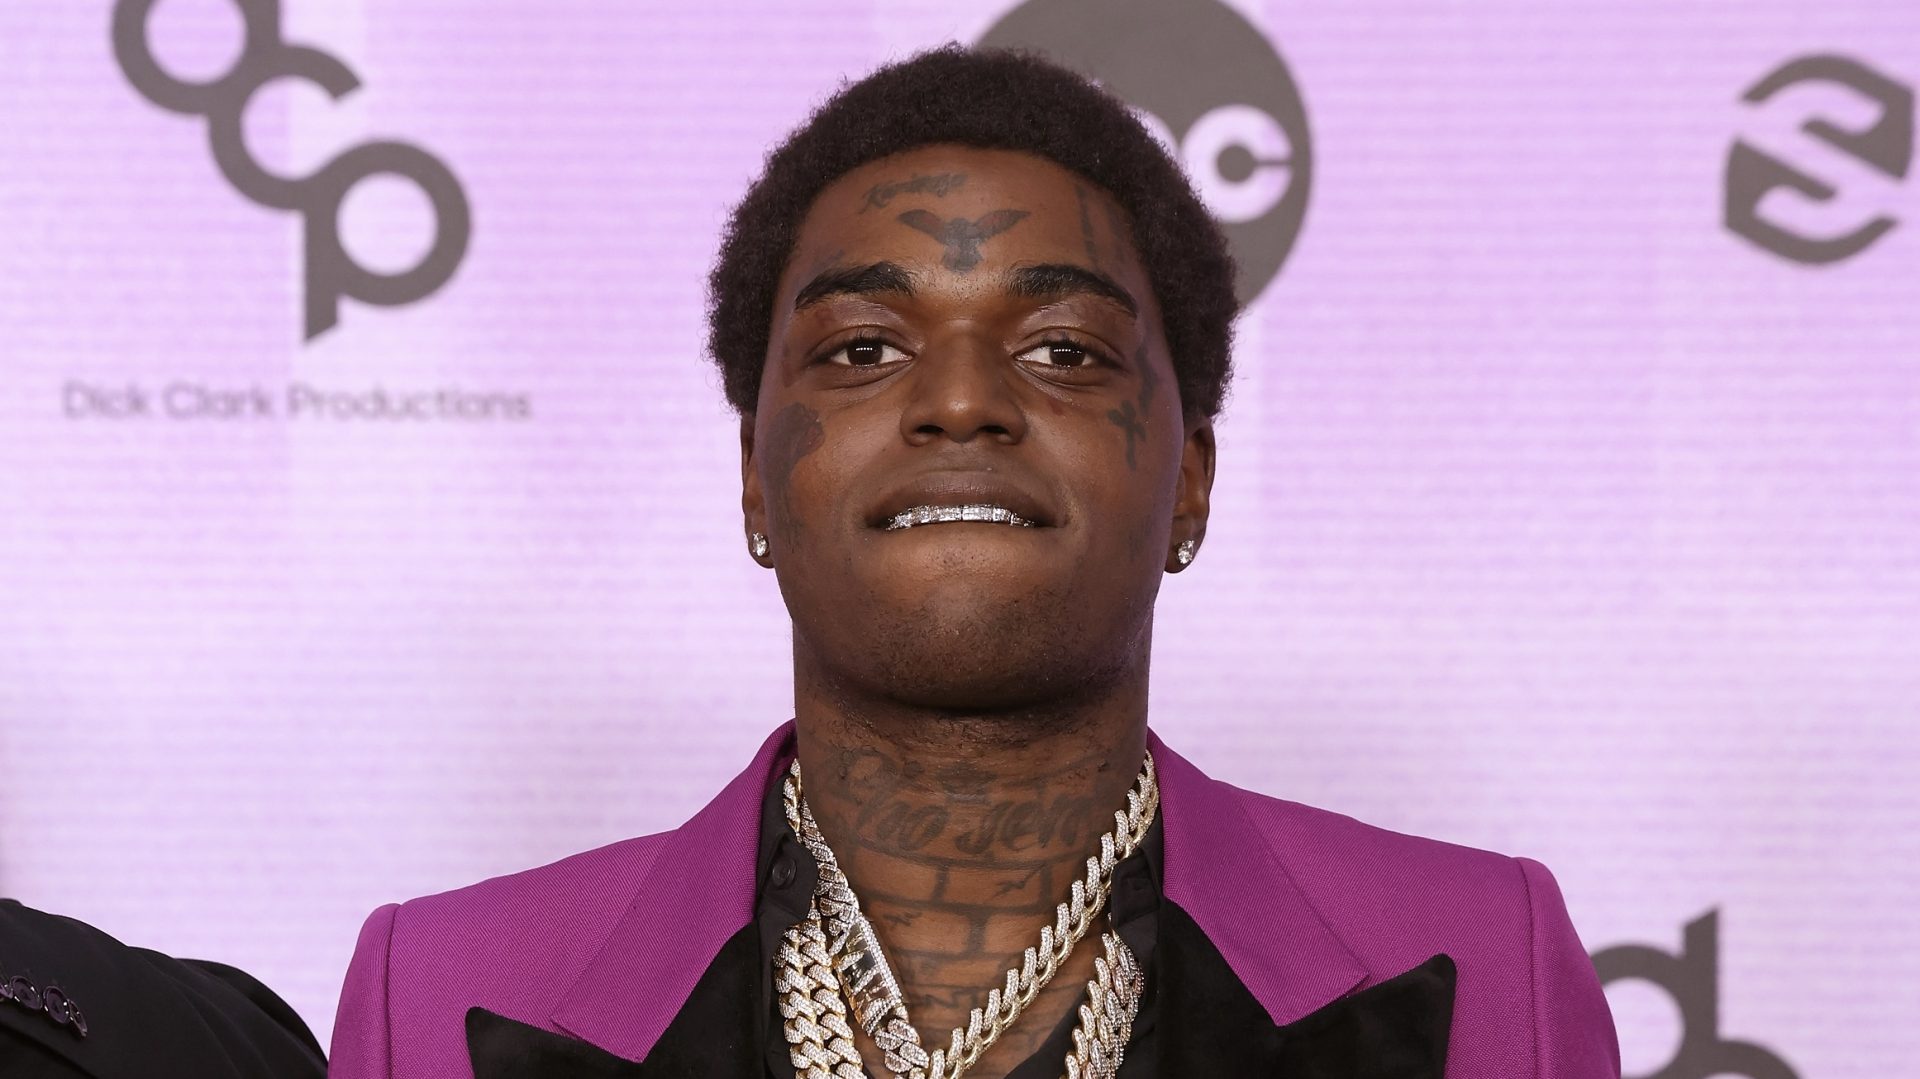 UPDATE: Kodak Black & His Lawyer Refute Drug Claims Related To The Rapper’s Recent Arrest thumbnail